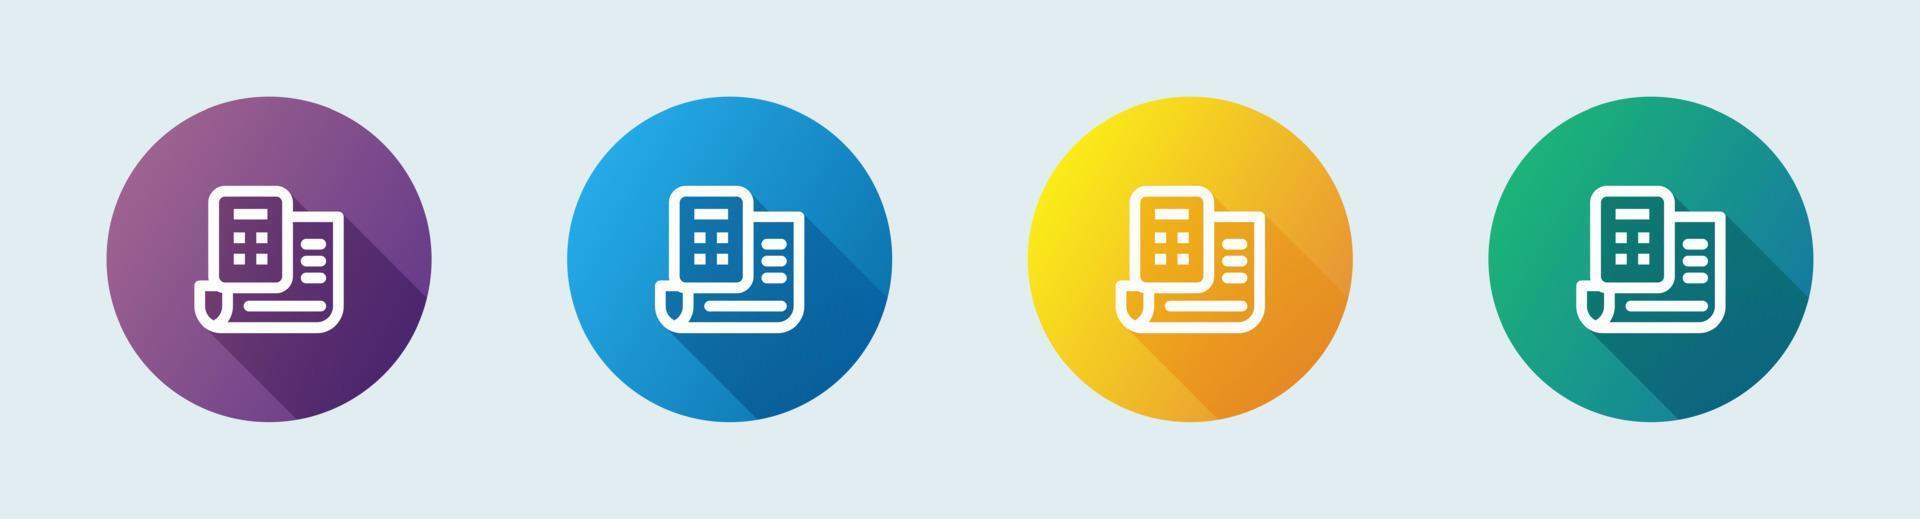 Accounting line icon in flat design style. Finance signs vector illustration.